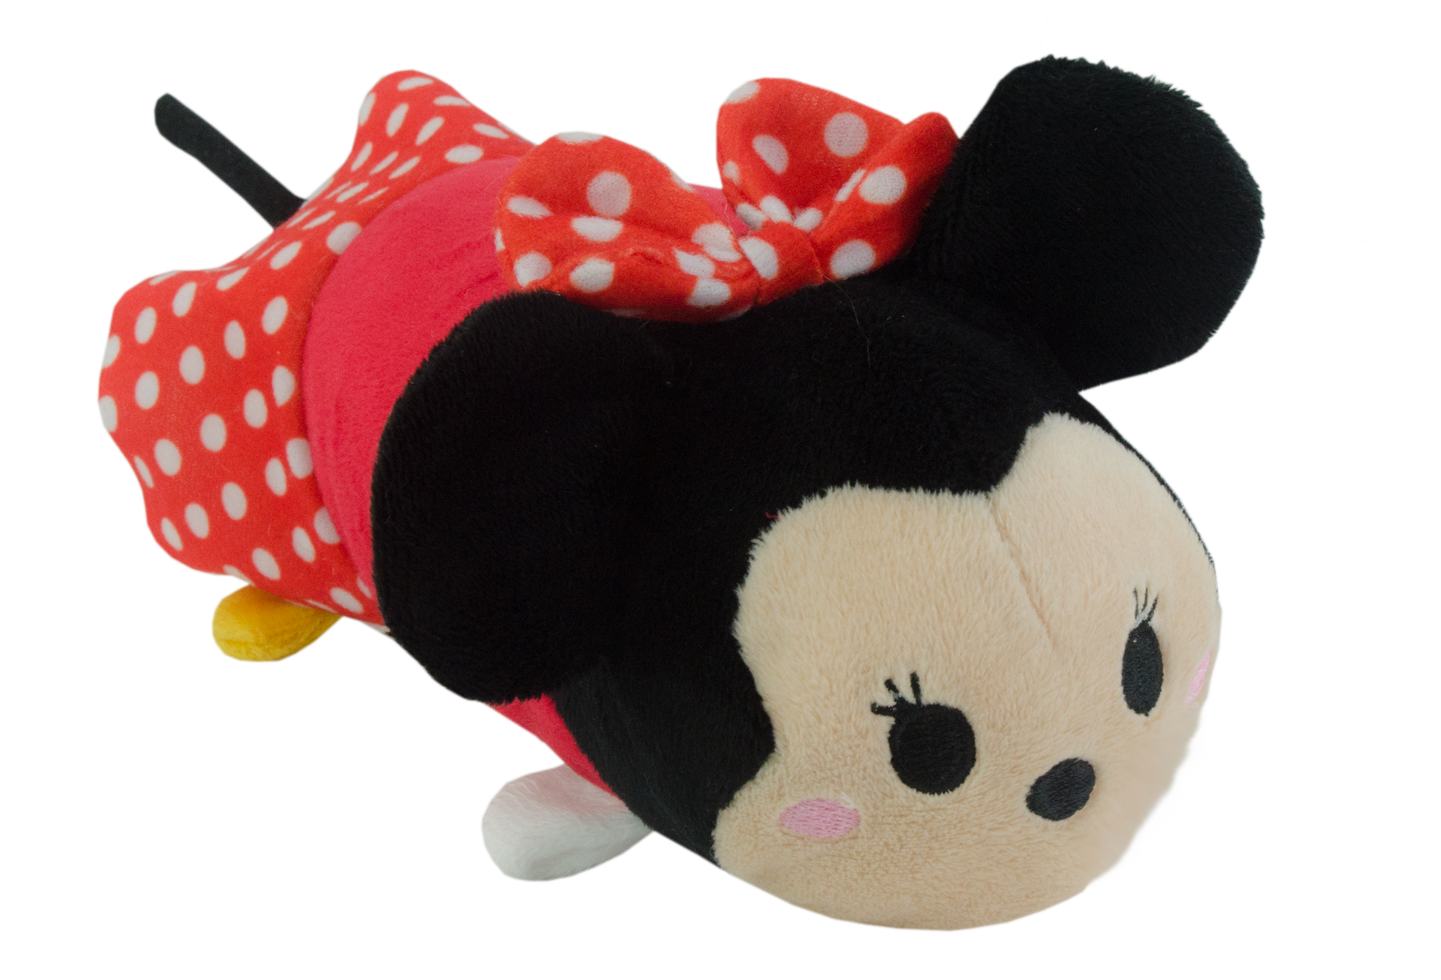 Afbeelding Disney Tsum Tsum Minnie Mouse Small door K-9 Security dogs